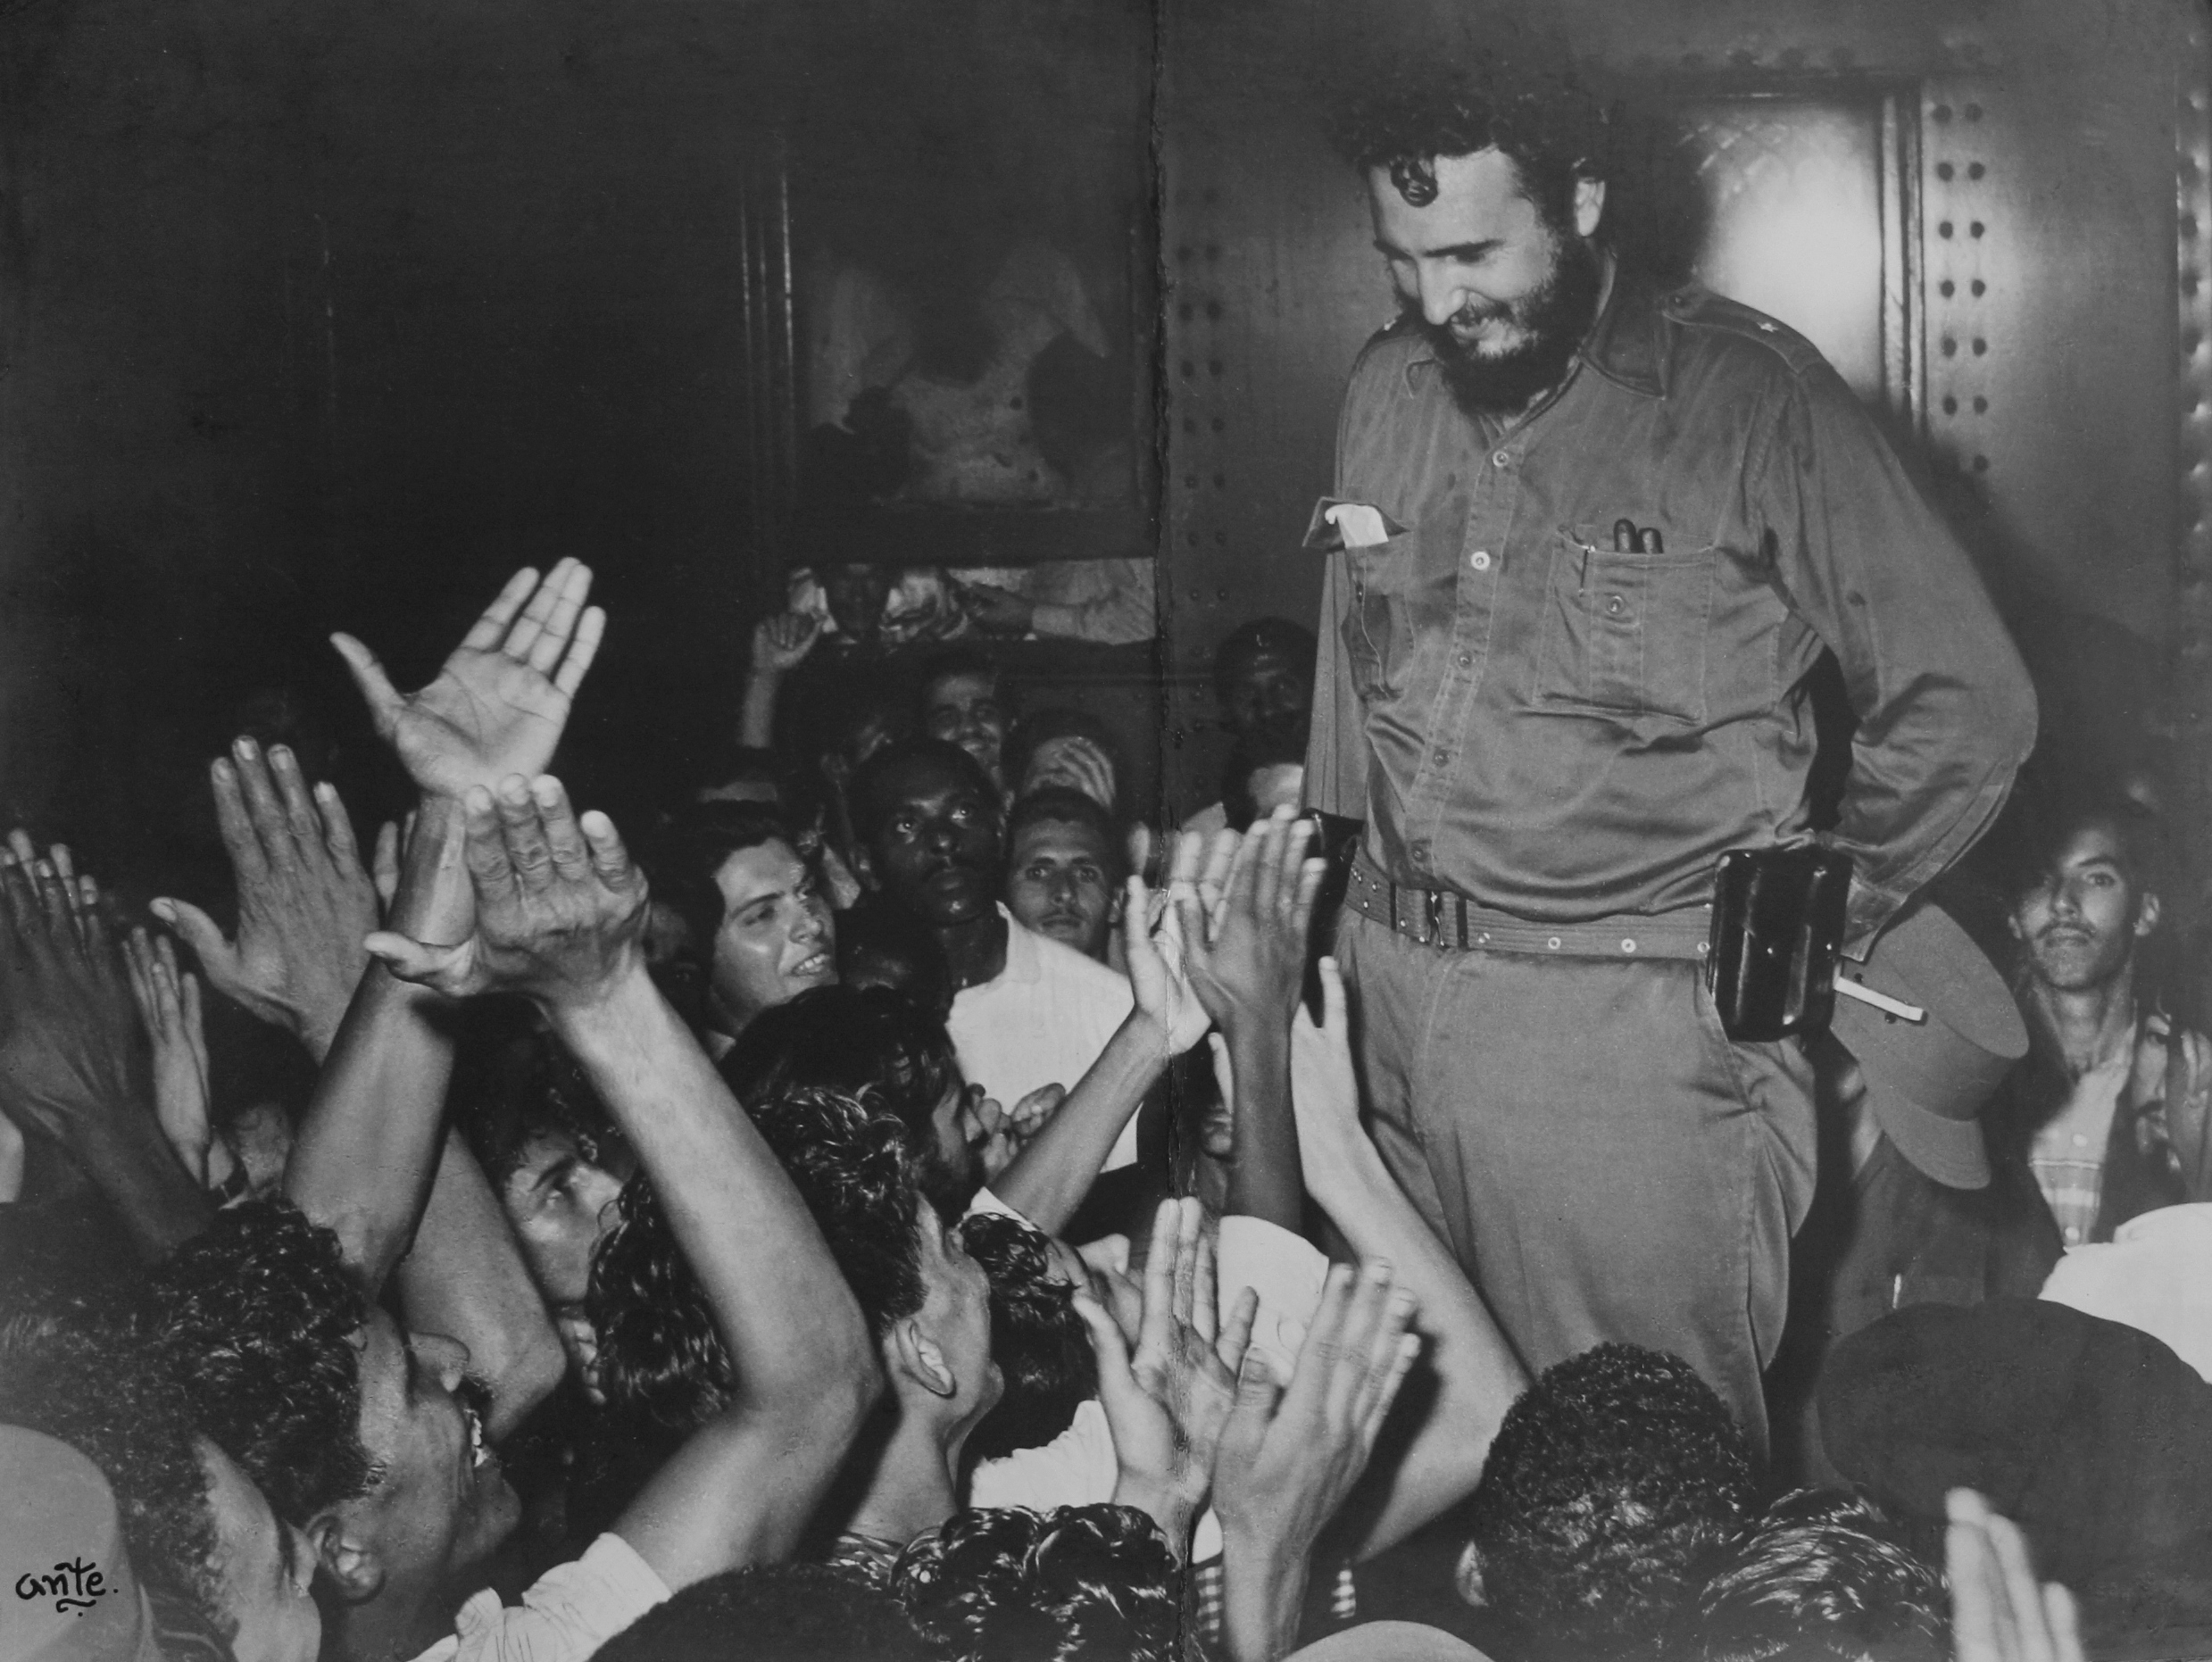 Gilberto Ante, Fidel with people applauding, 1960s
Vintage gelatin silver print, printed 1960s
29 x 38 cm
